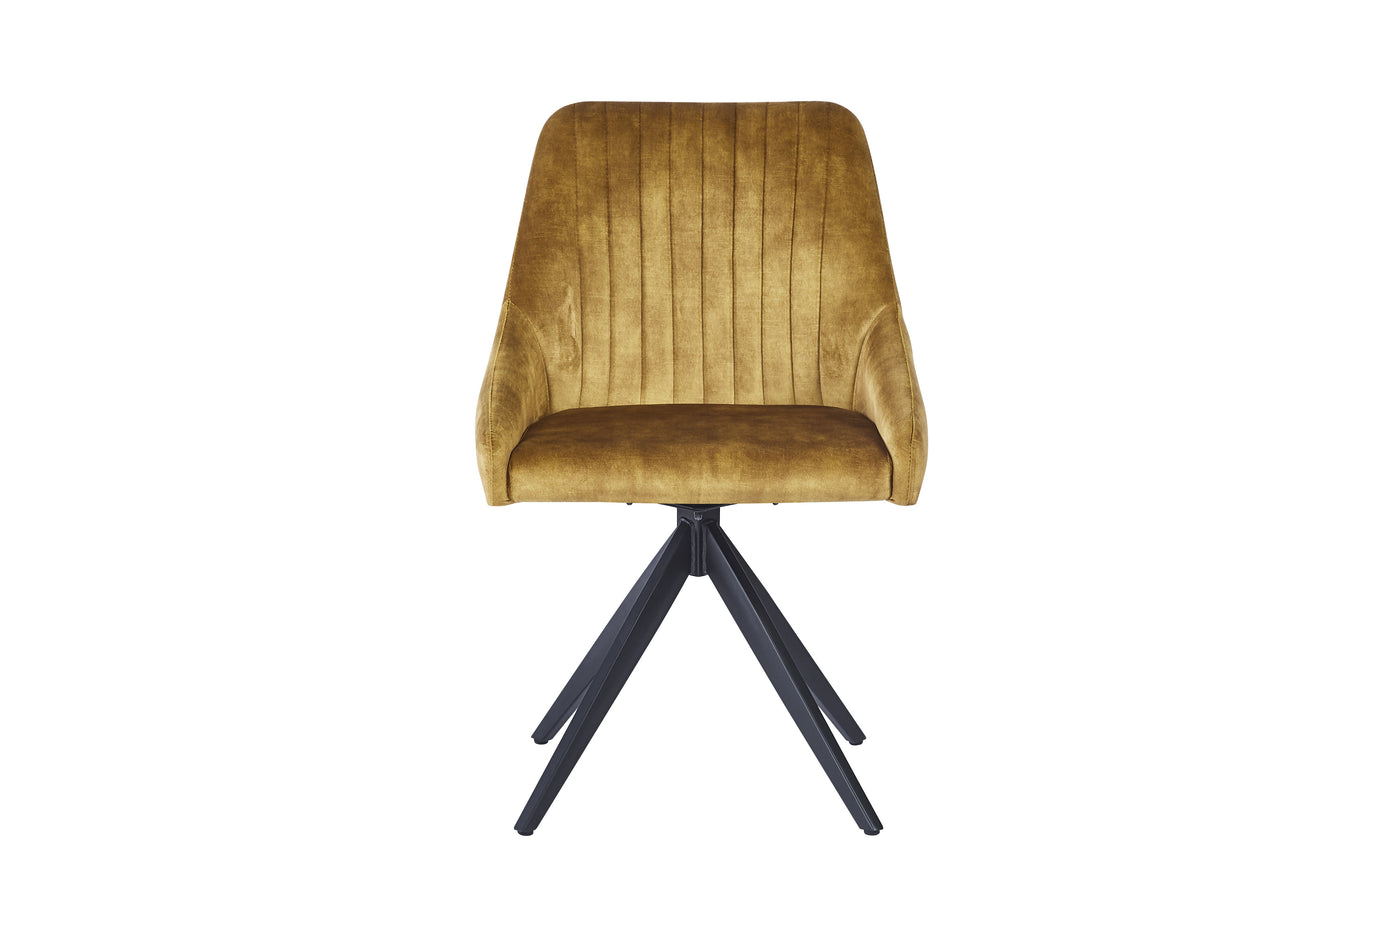 Giorgio Swivel Velvet Dining Chairs With Black Metal Base in 3 Colours - Pairs